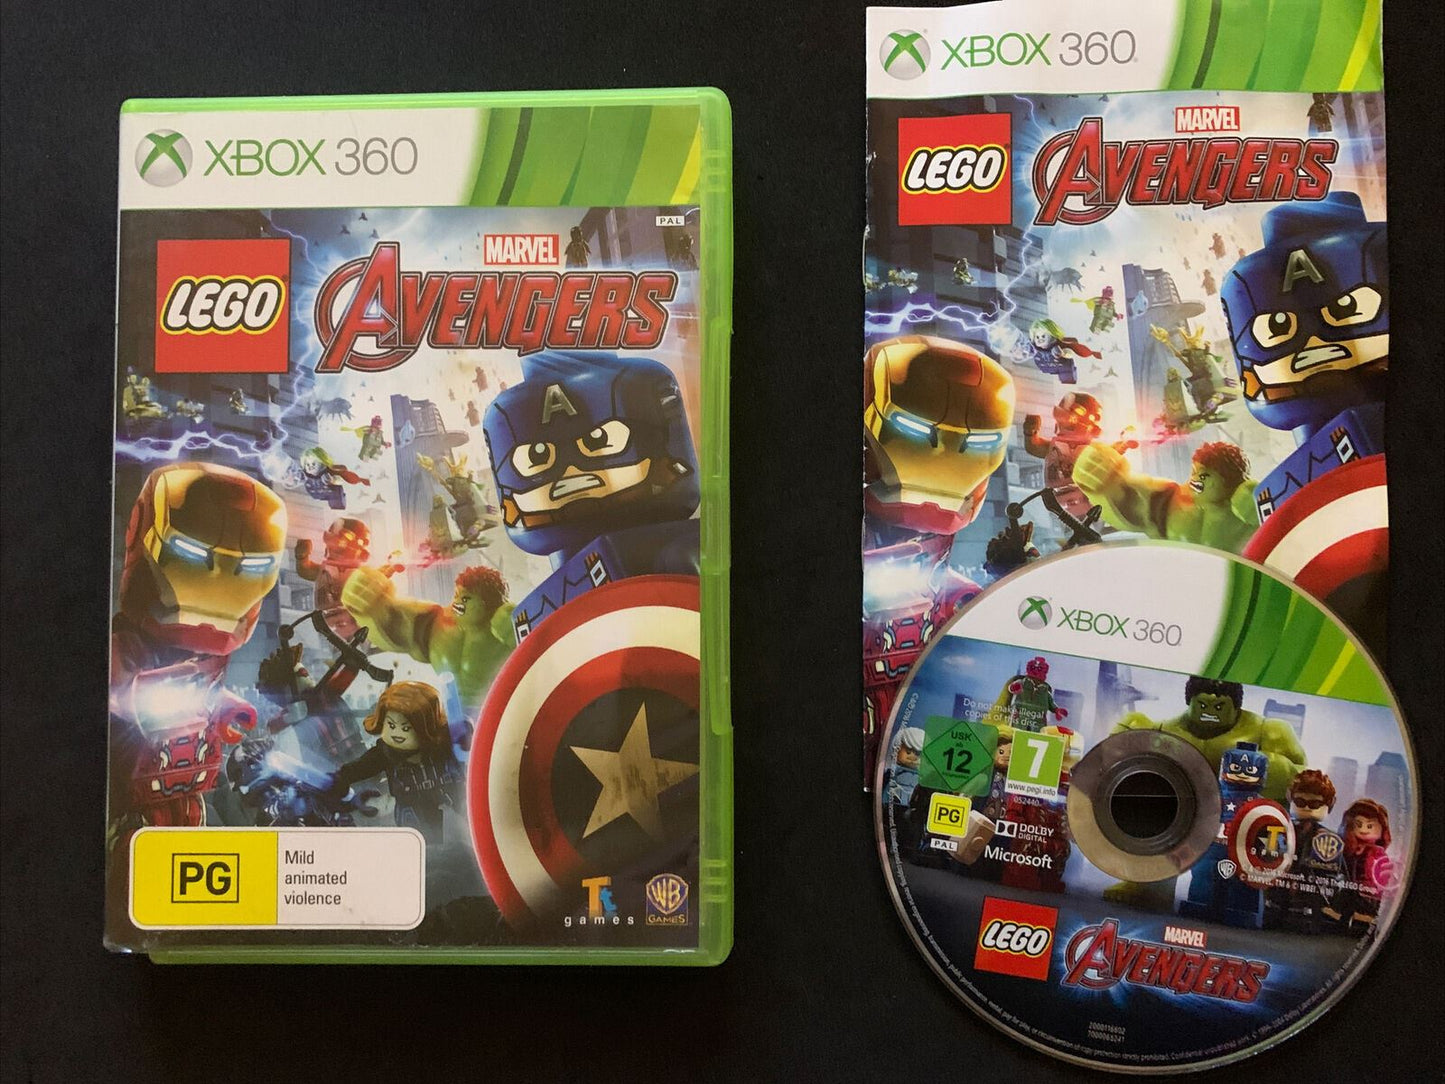 LEGO Marvel Avengers - Xbox 360 Game - Australian PAL Version with Manual